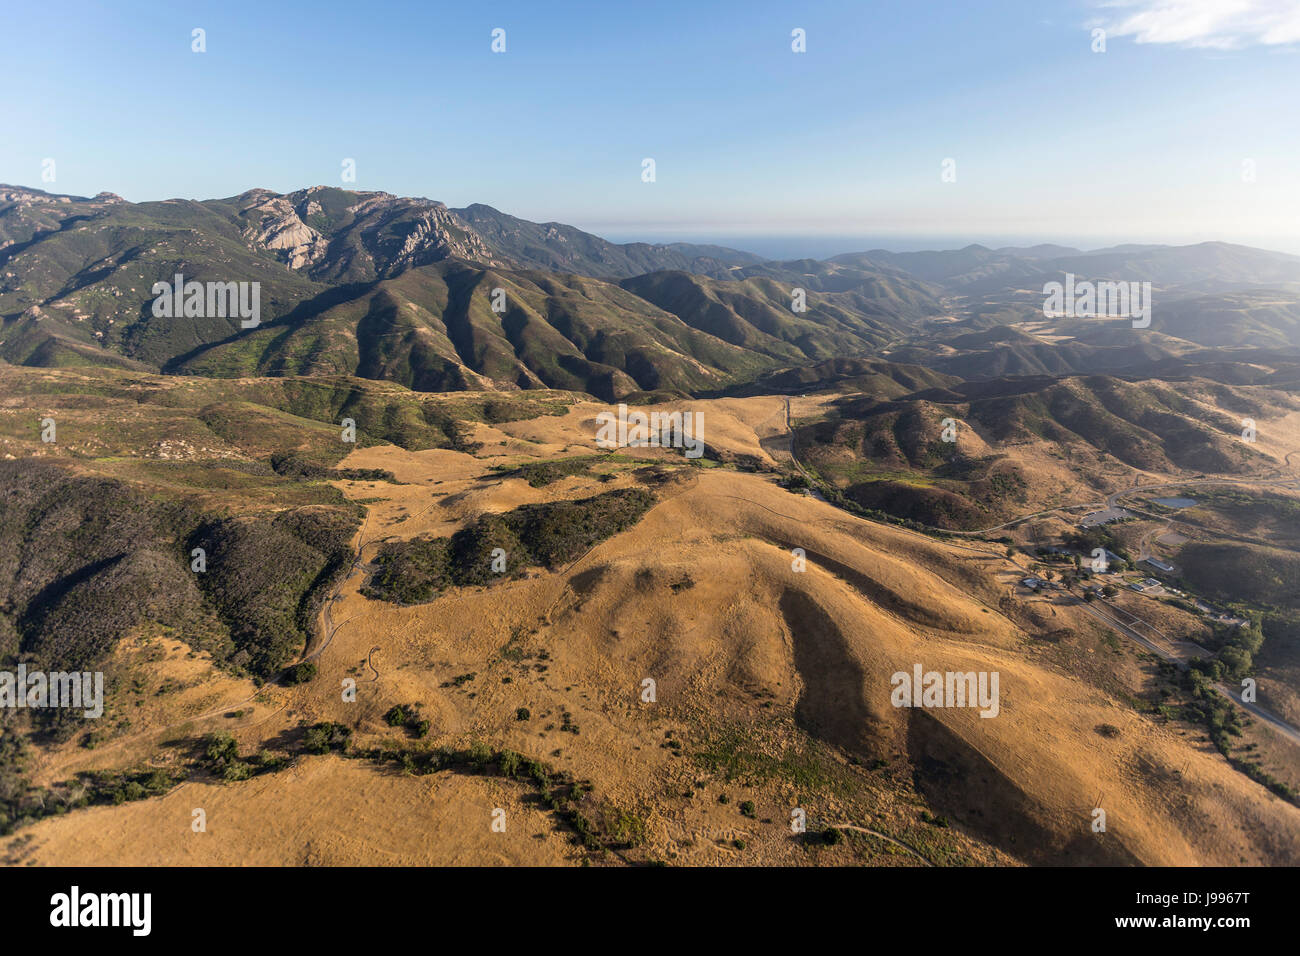 Aerial view of Mt. Boney and Rancho Sierra Vista in the Santa Monica Mountains National Recreation Area. Stock Photo